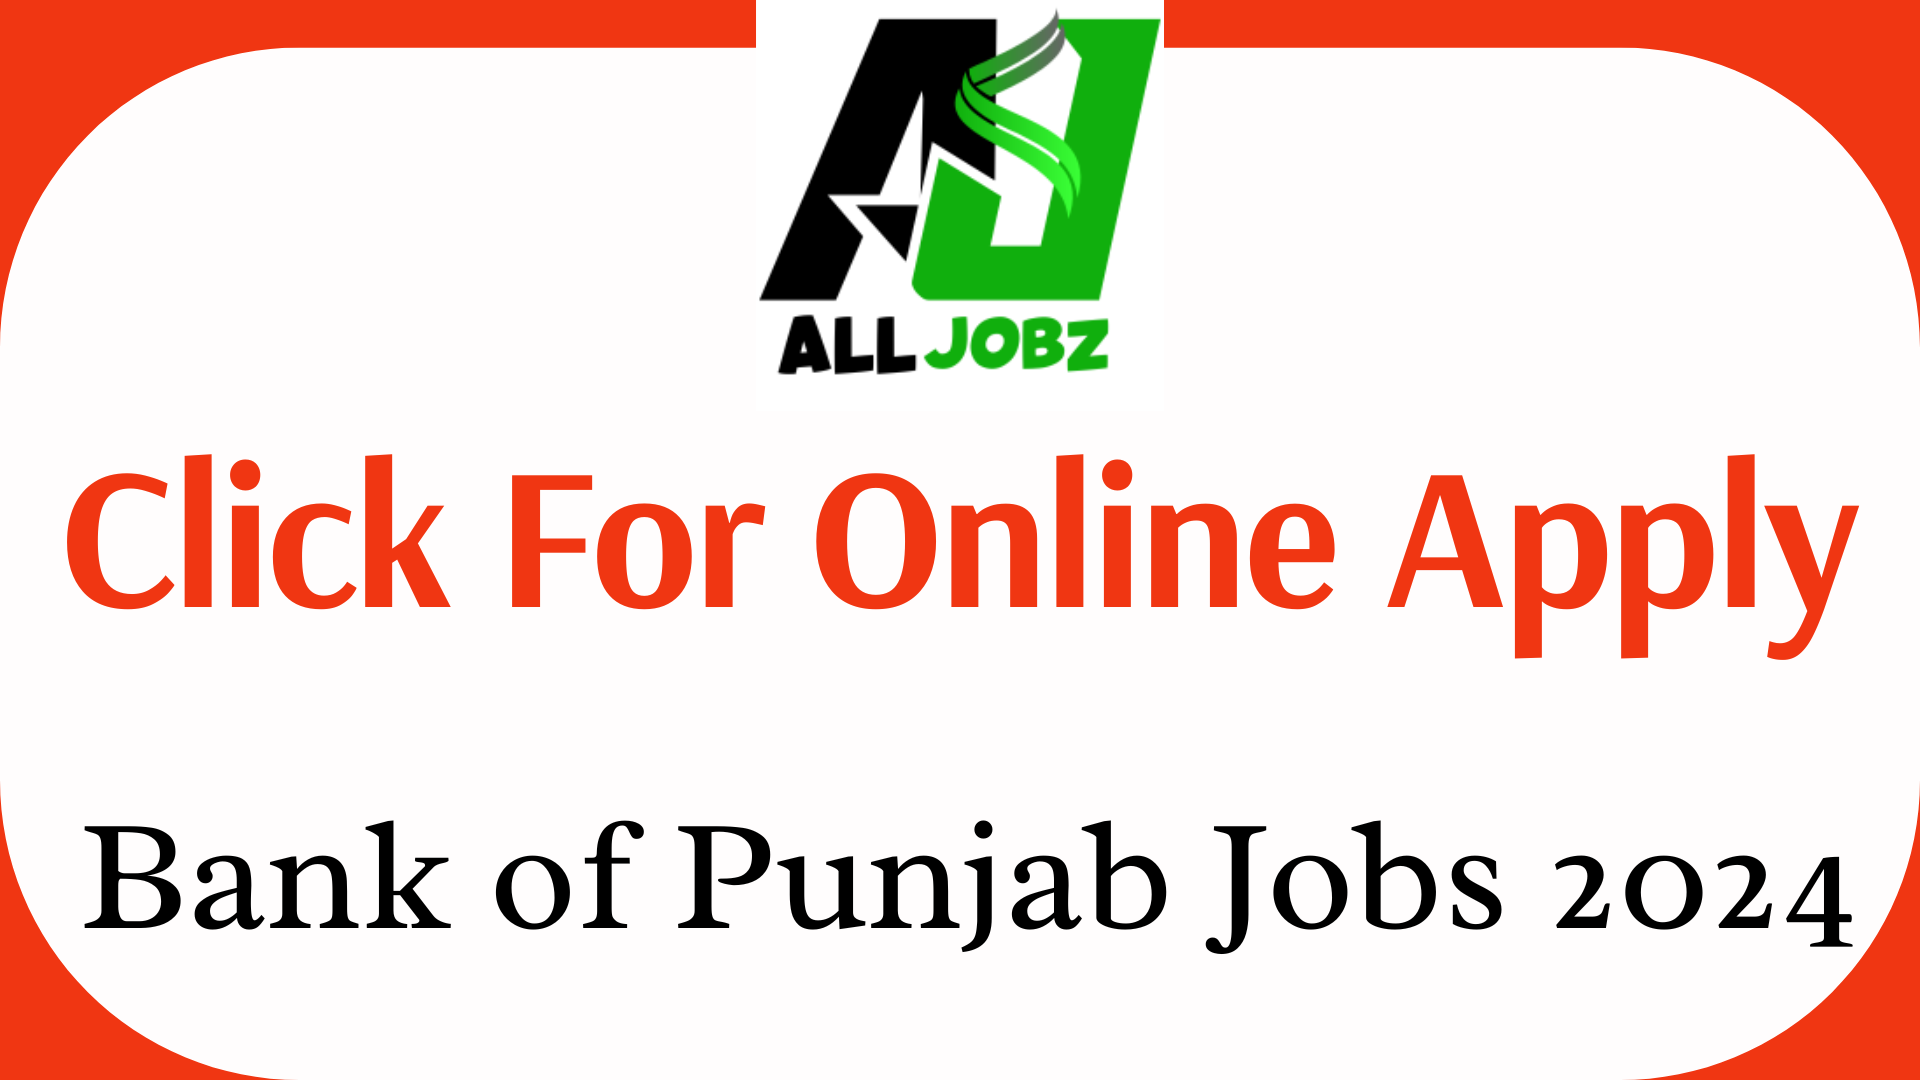 Latest The Bank Of Punjab Jobs 2024 Online Apply, The Bank Of Punjab Jobs 2024 Last Date, The Bank Of Punjab Jobs 2024 Salary, The Bank Of Punjab Jobs 2024 Apply Online, Bop Jobs For Freshers, Bop Jobs 2024 Online Apply, Bank Jobs Online Apply, The Bank Of Punjab Jobs 2024 For Freshers, The Bank Of Punjab Jobs 2024 For Female,